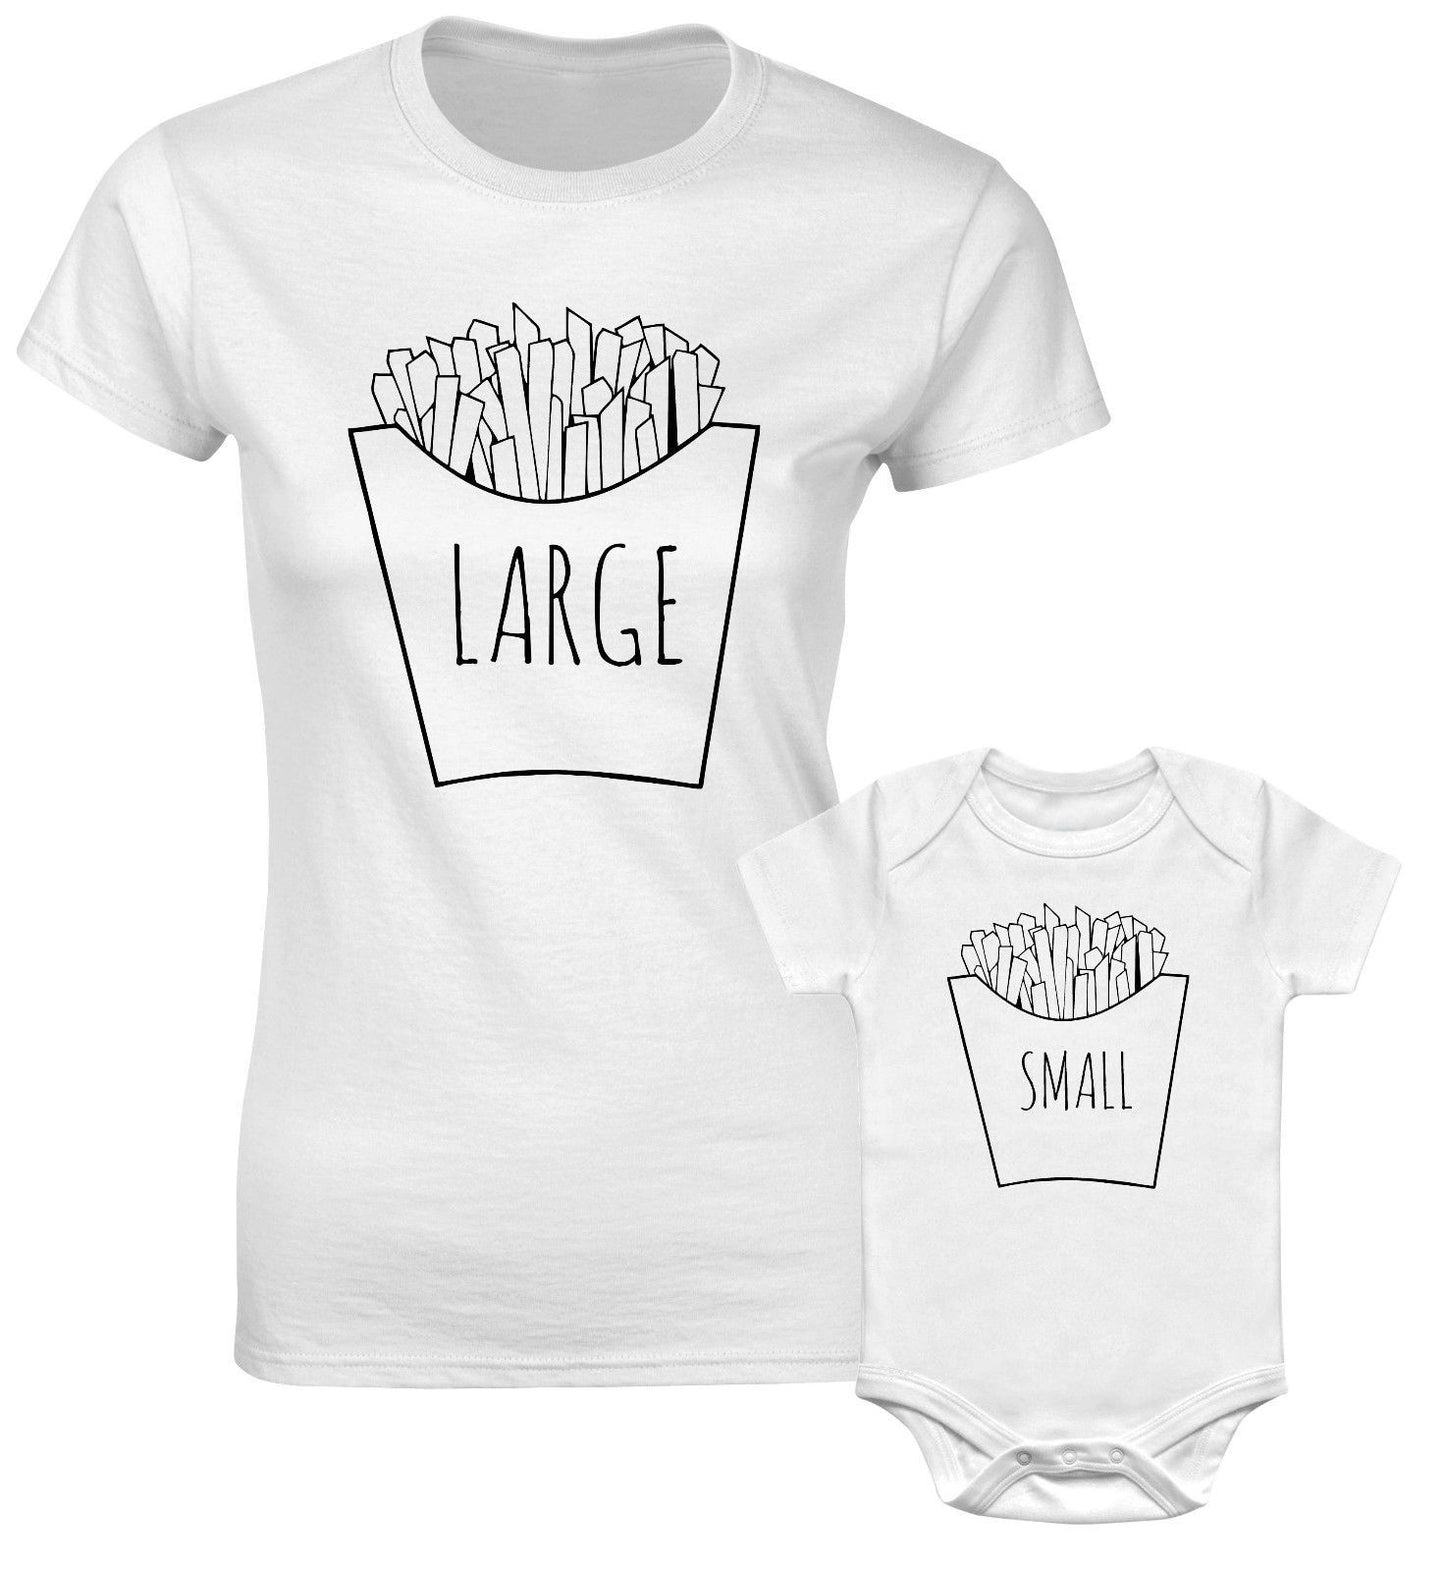 Large Chips Small Chips Mom Son Mother Daughter Matching T shirts